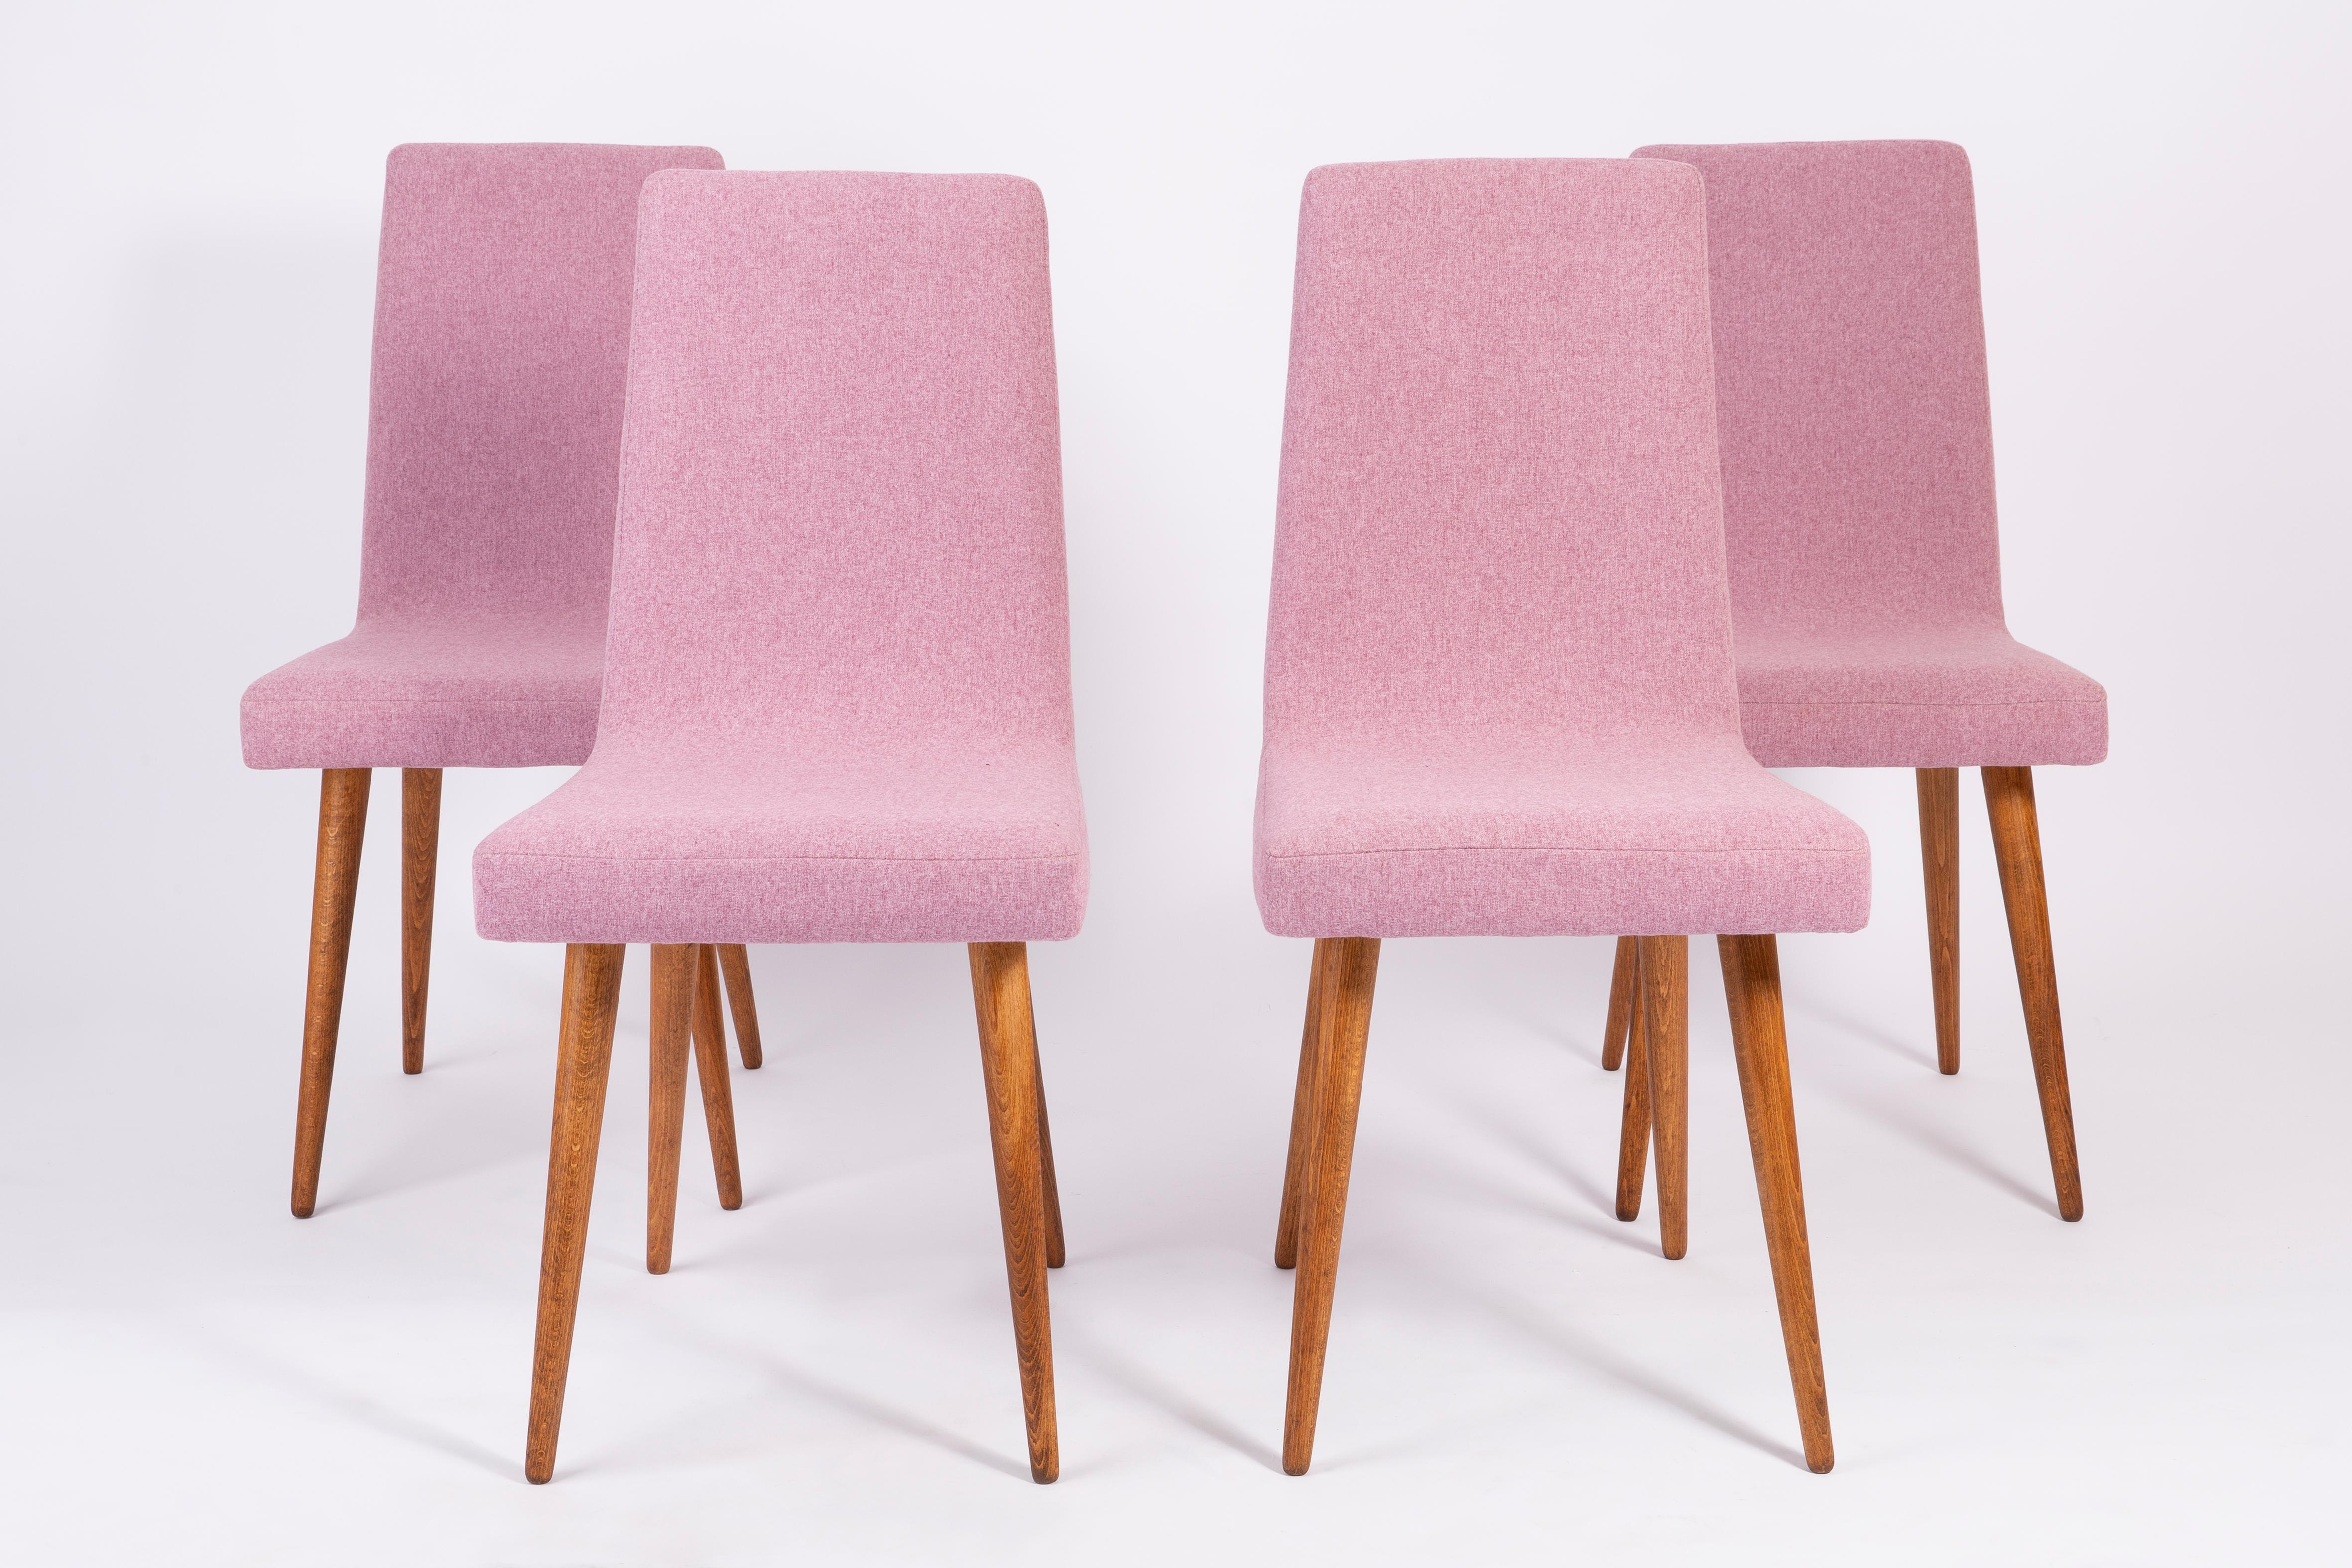 Chairs designed by Prof. Rajmund Halas. They have been made of beechwood. They have undergone a complete upholstery renovation, the woodwork has been cleaned and refreshed. We used matte varnish. Seats and backs were dressed in a pink mélange (color